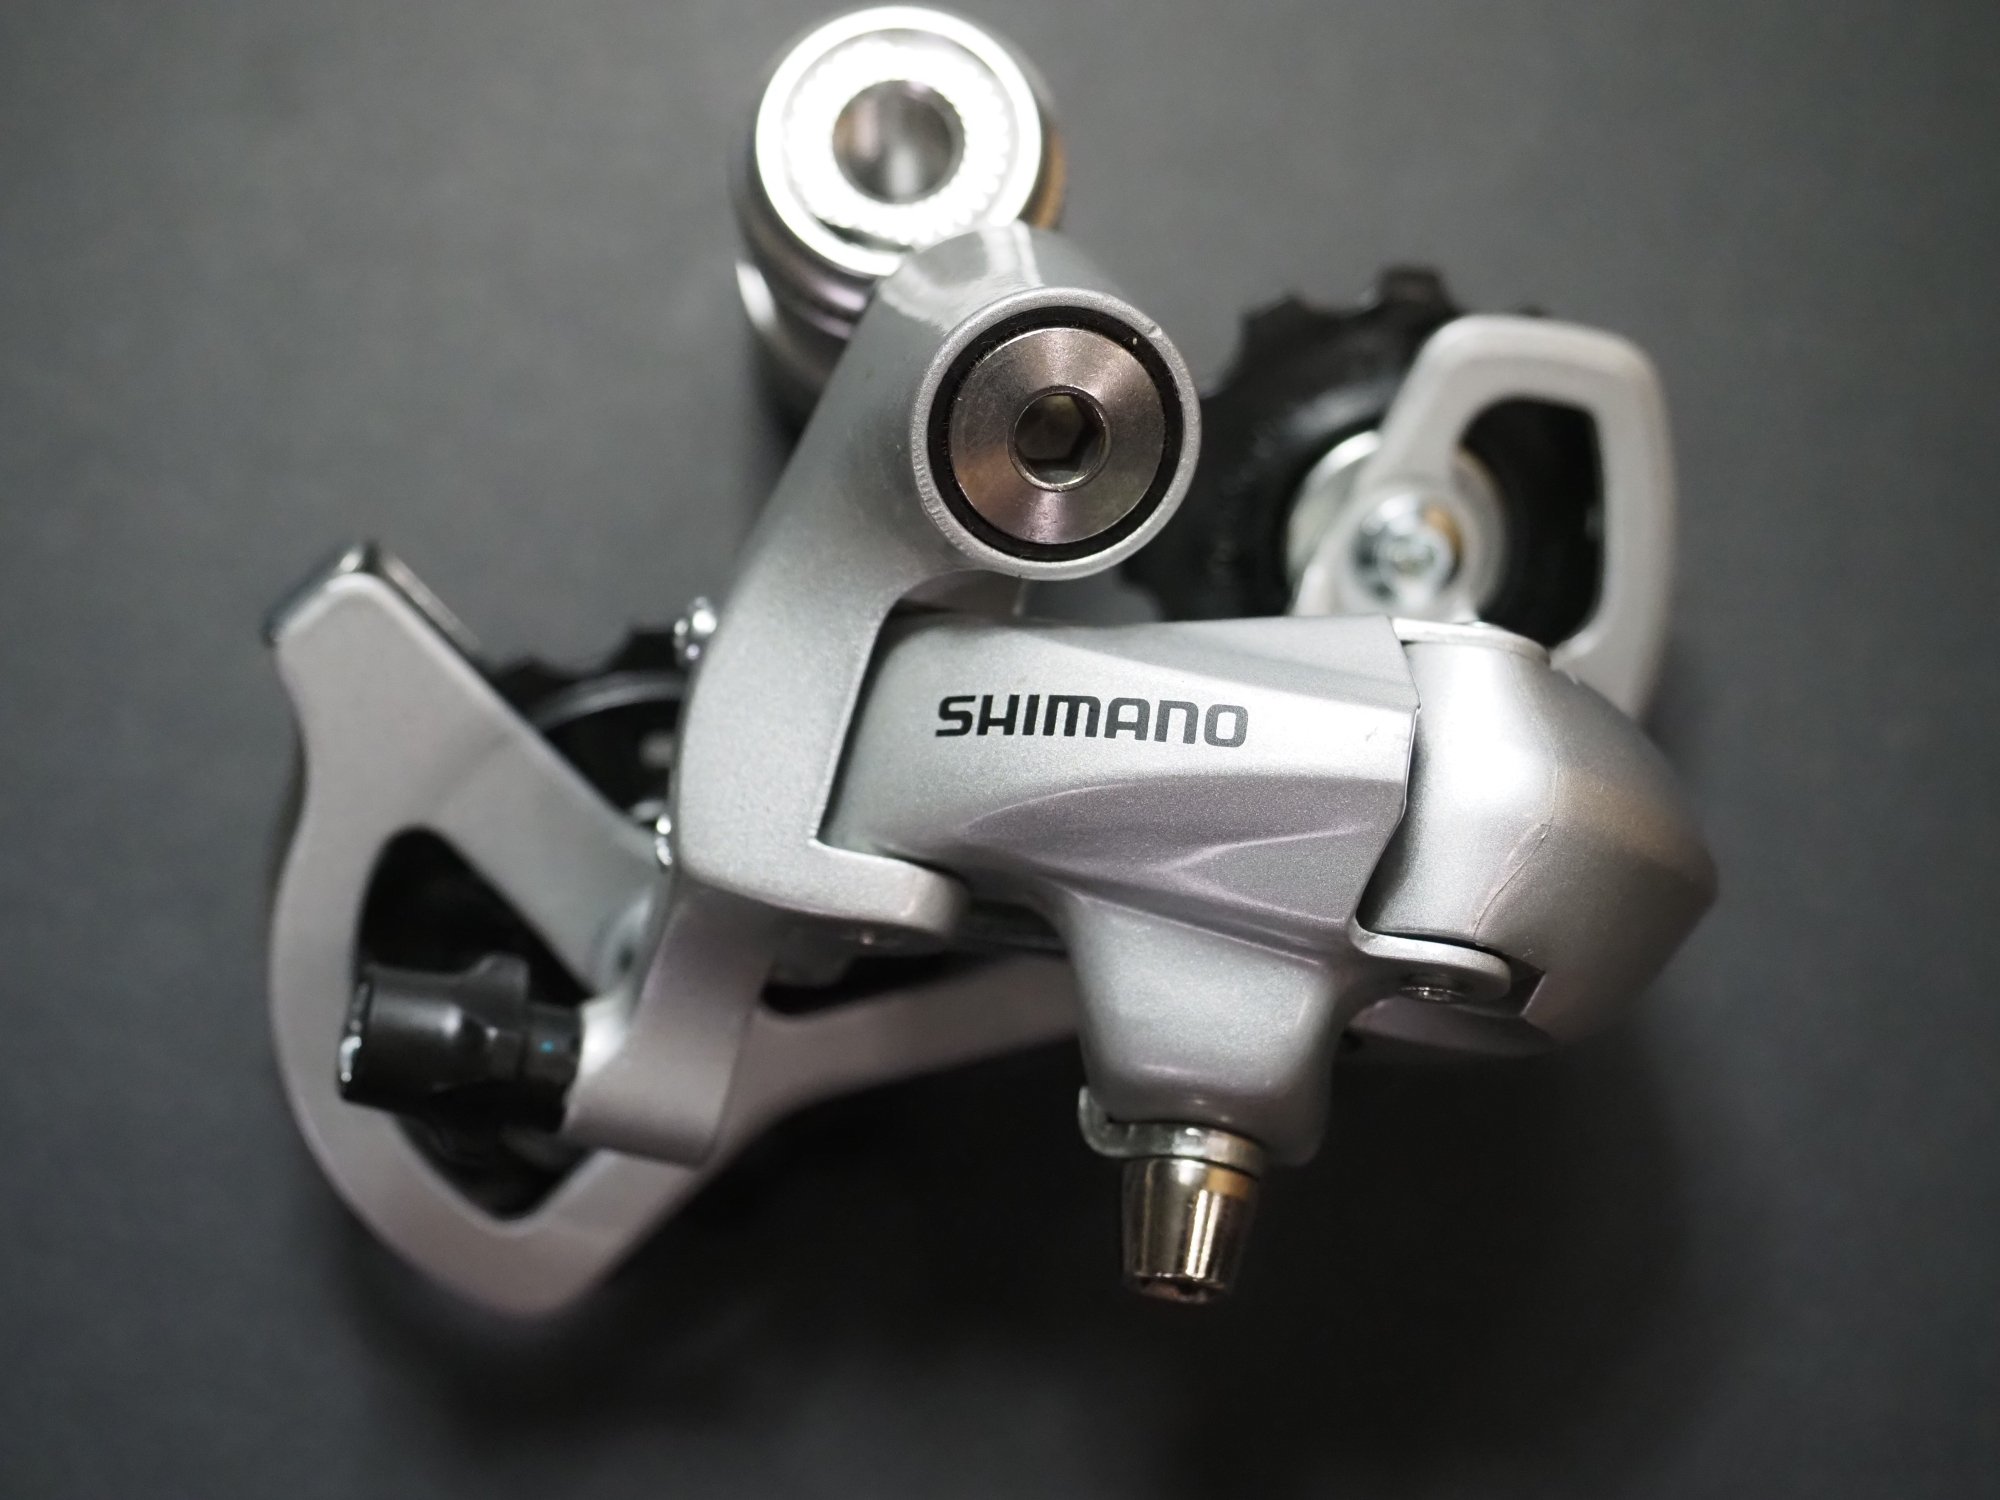 <img class='new_mark_img1' src='https://img.shop-pro.jp/img/new/icons56.gif' style='border:none;display:inline;margin:0px;padding:0px;width:auto;' />SHIMANO RD-2300